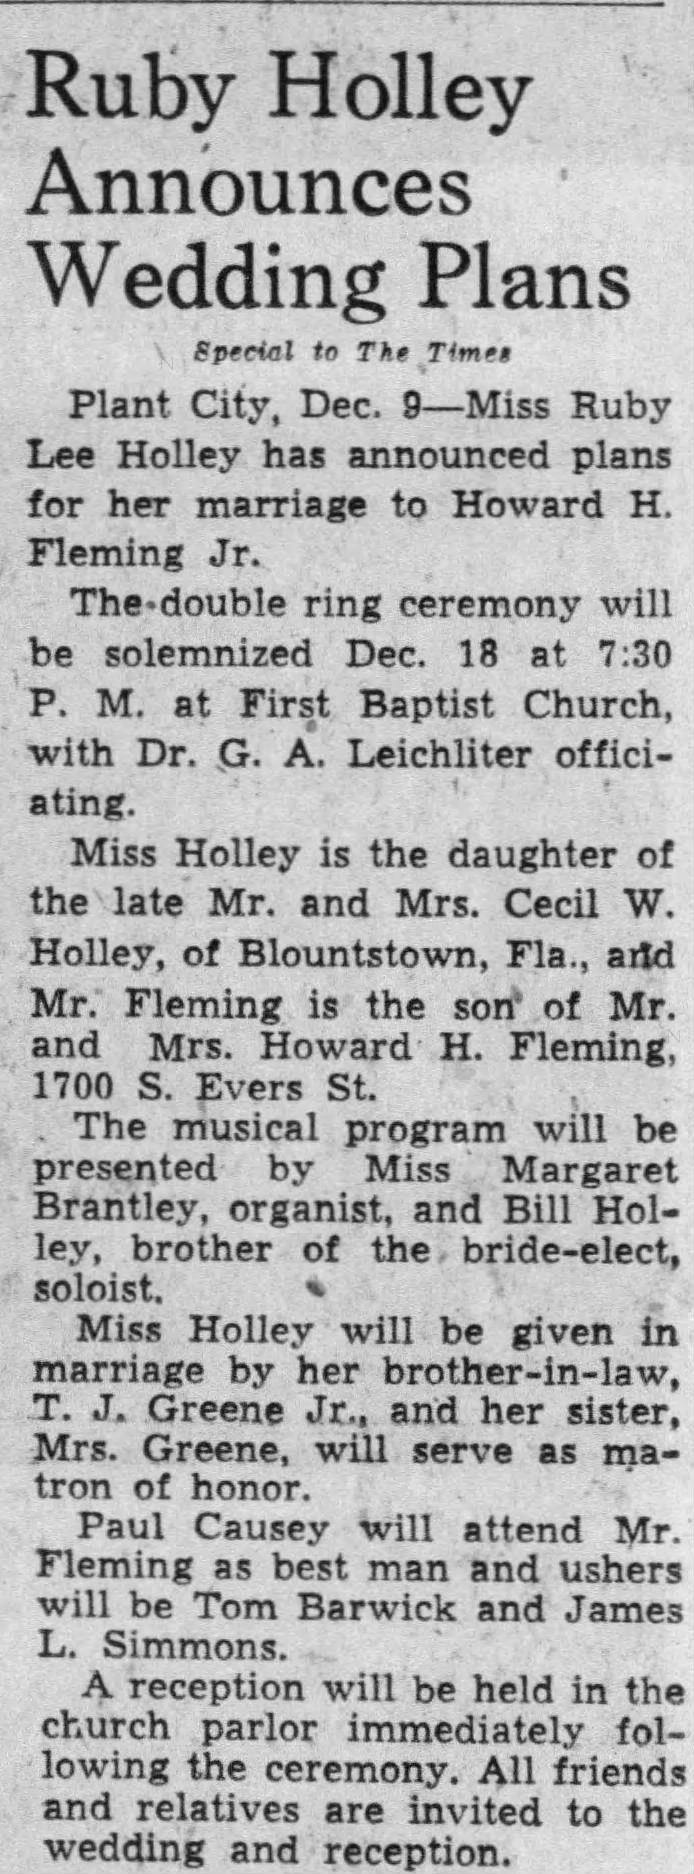 Marriage of Holley / Fleming